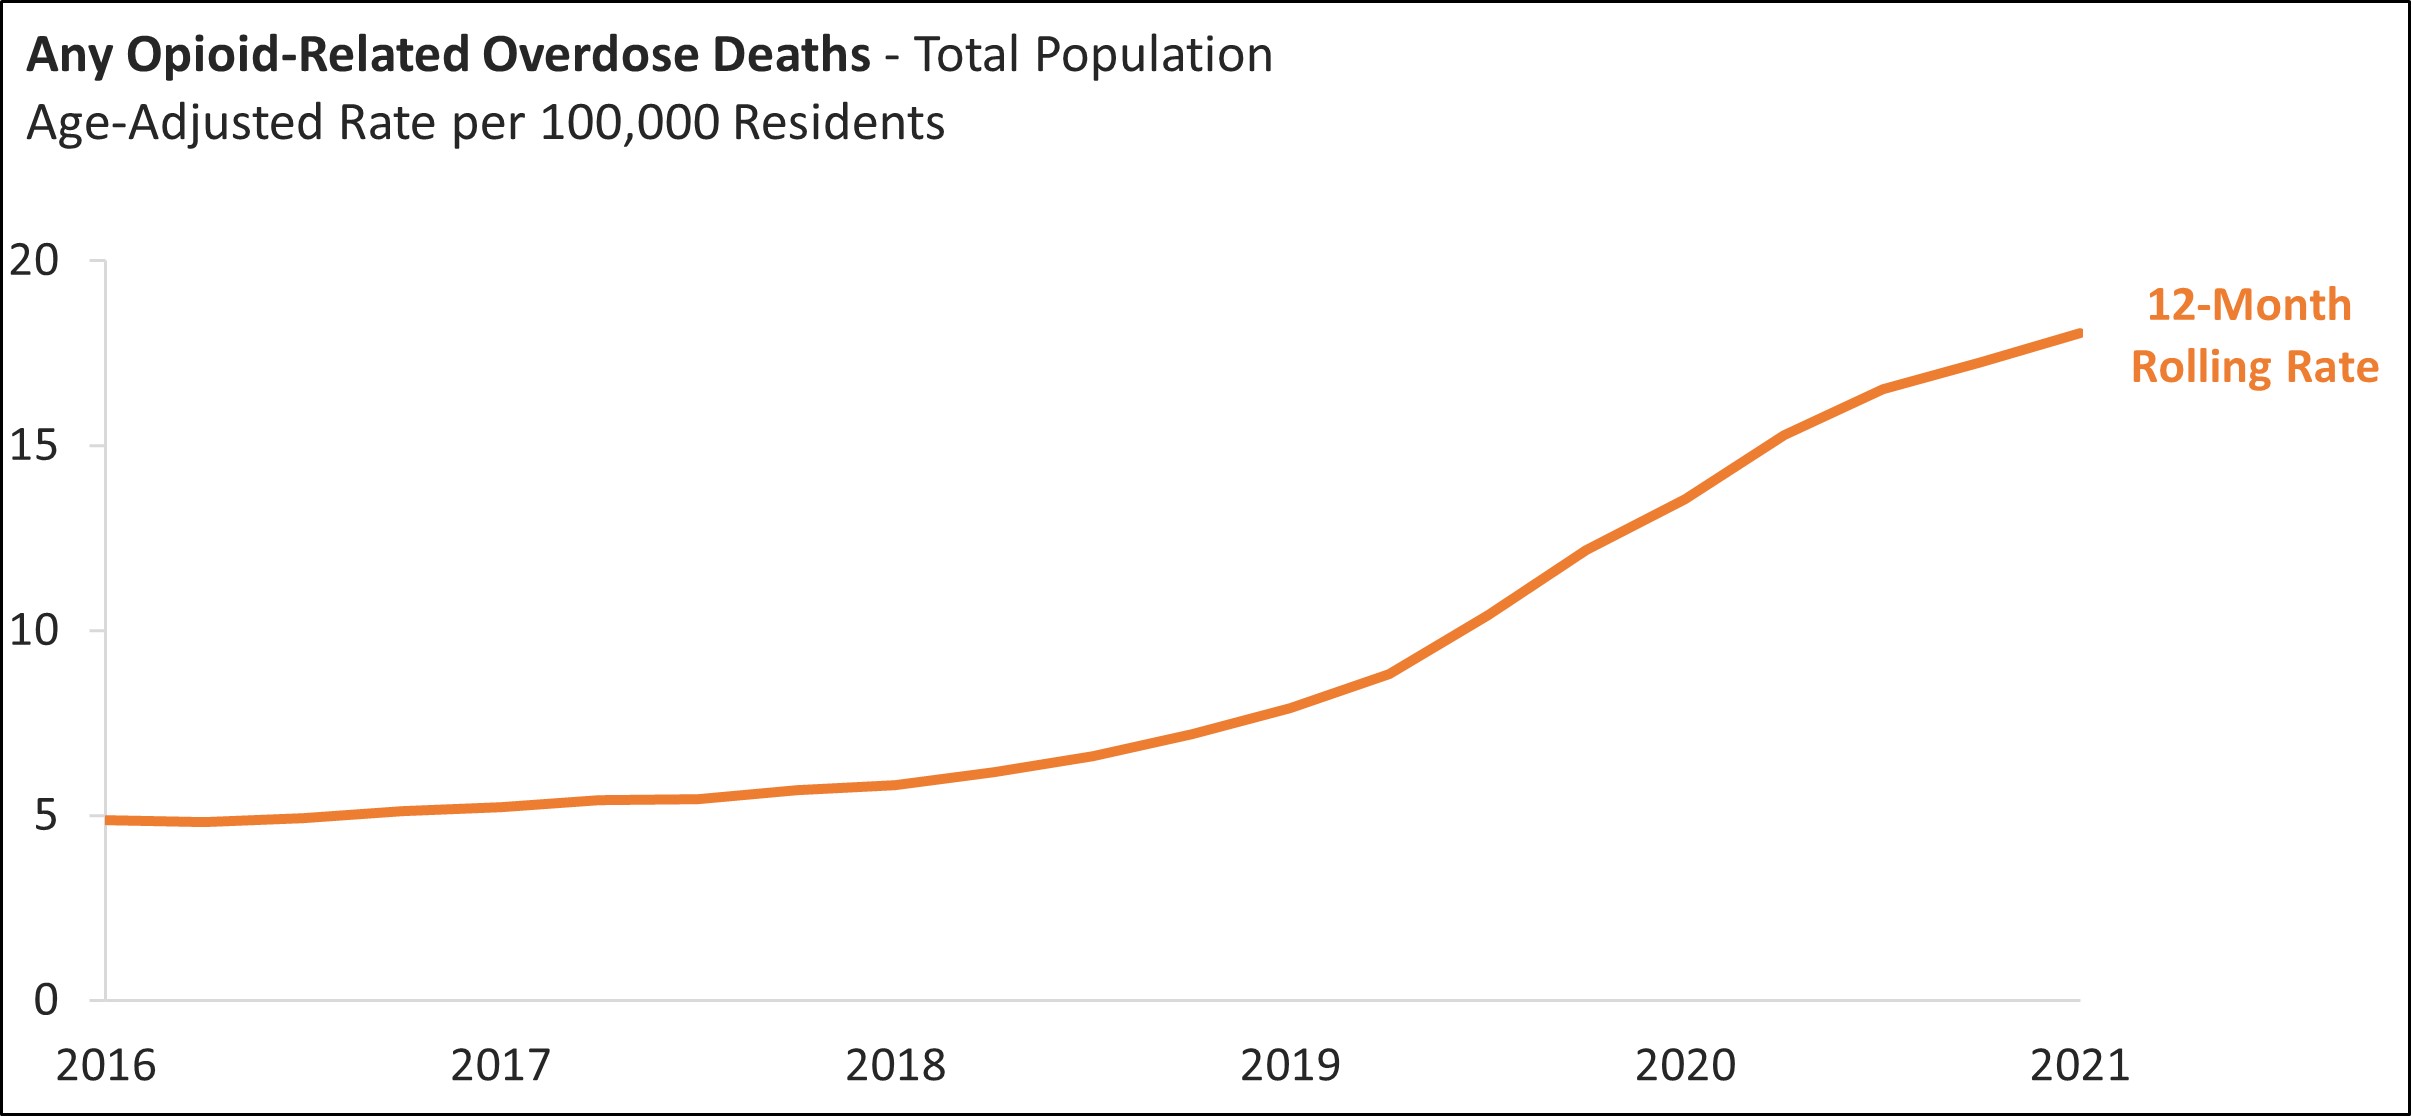 Any opioid-related iverdise deaths graph.